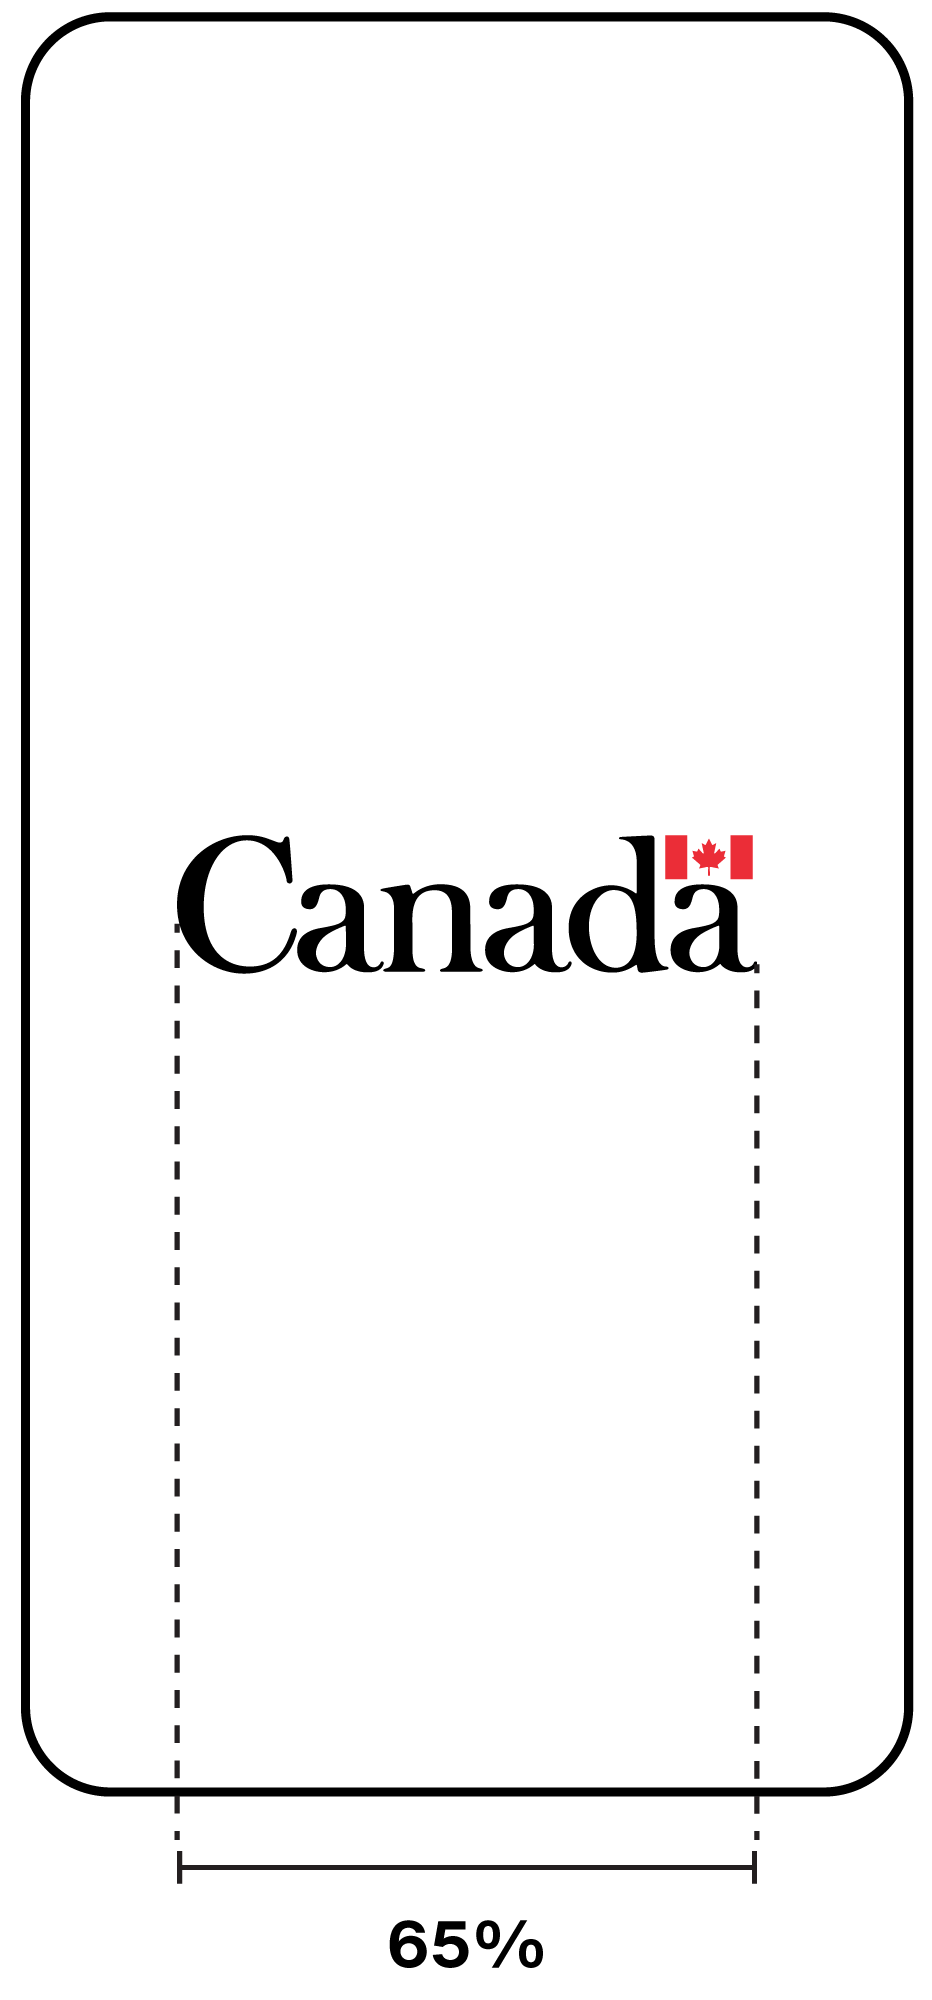 Example of a launch screen with the Canada wordmark centred. The wordmark is 65% of the width of the launch screen when the smartphone is in “portrait” mode.